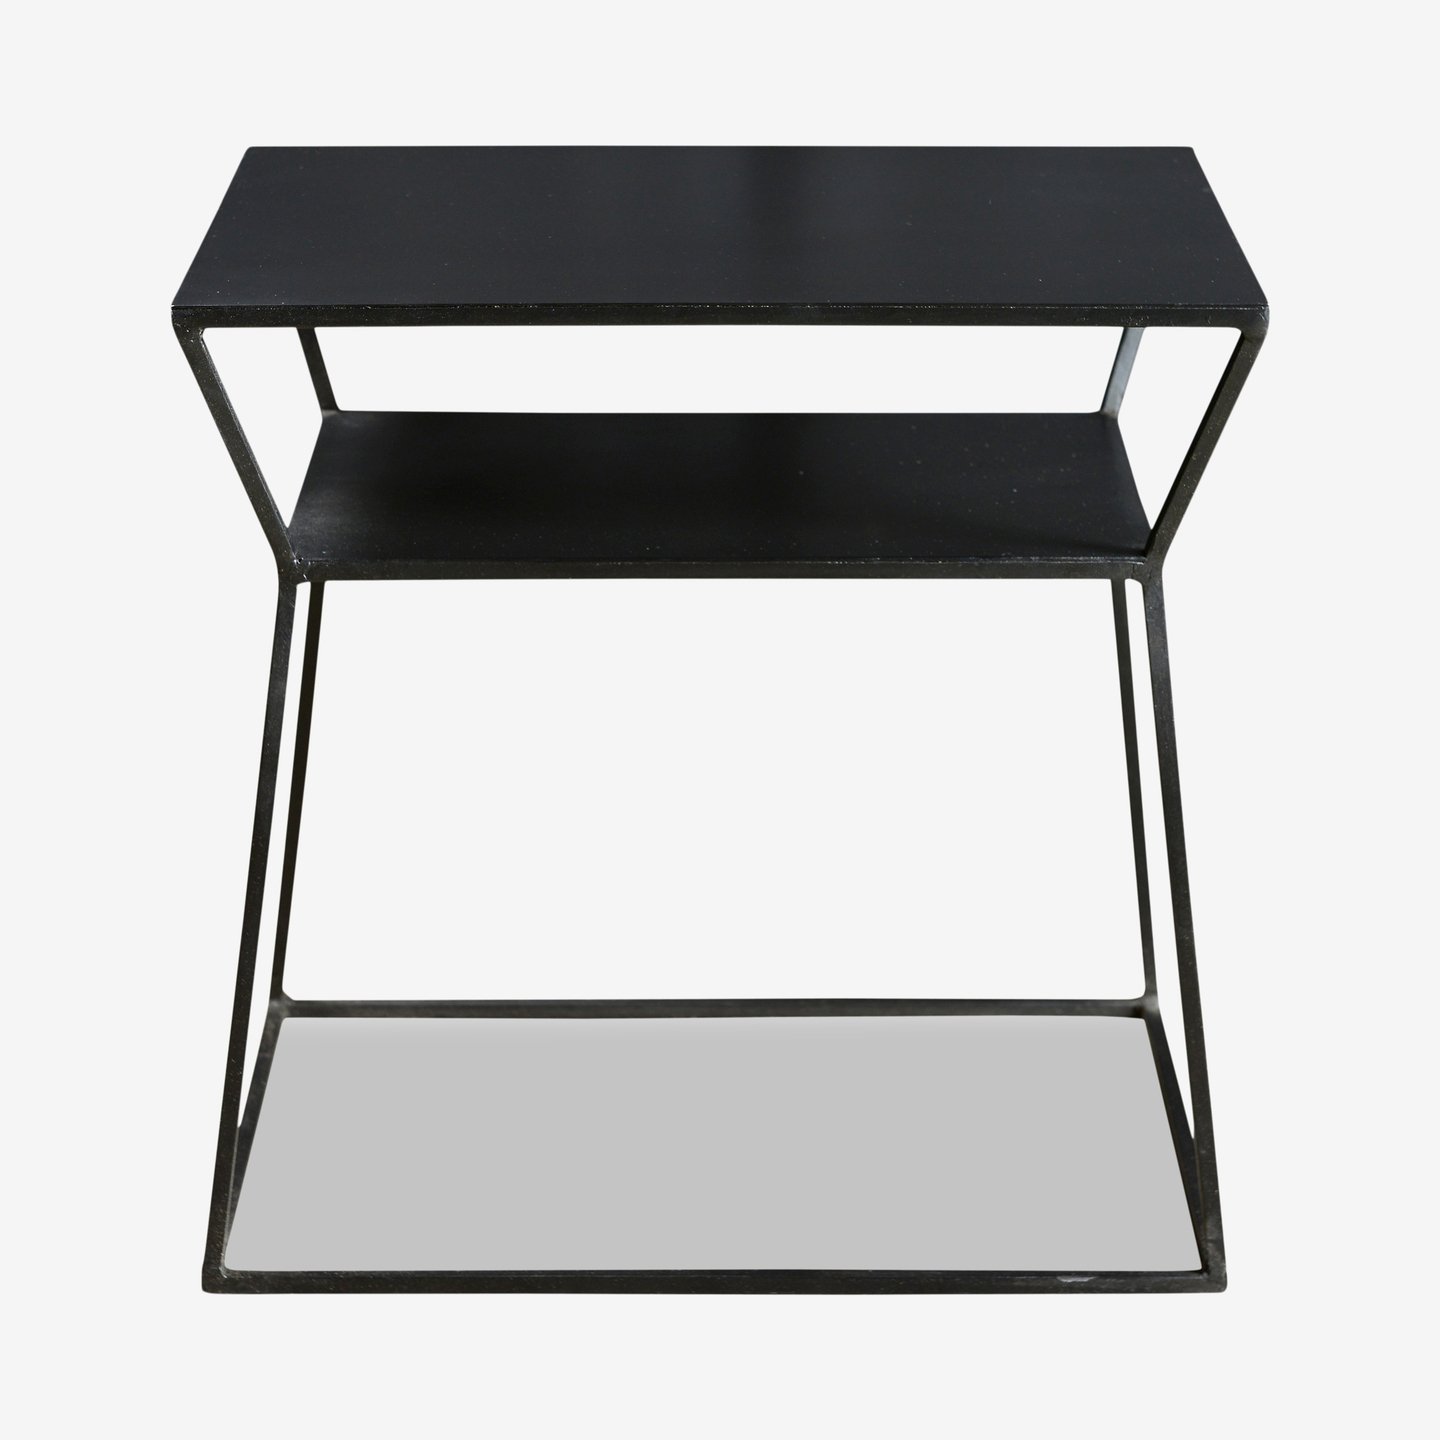 1368_Midland-End-Table_Front_2021